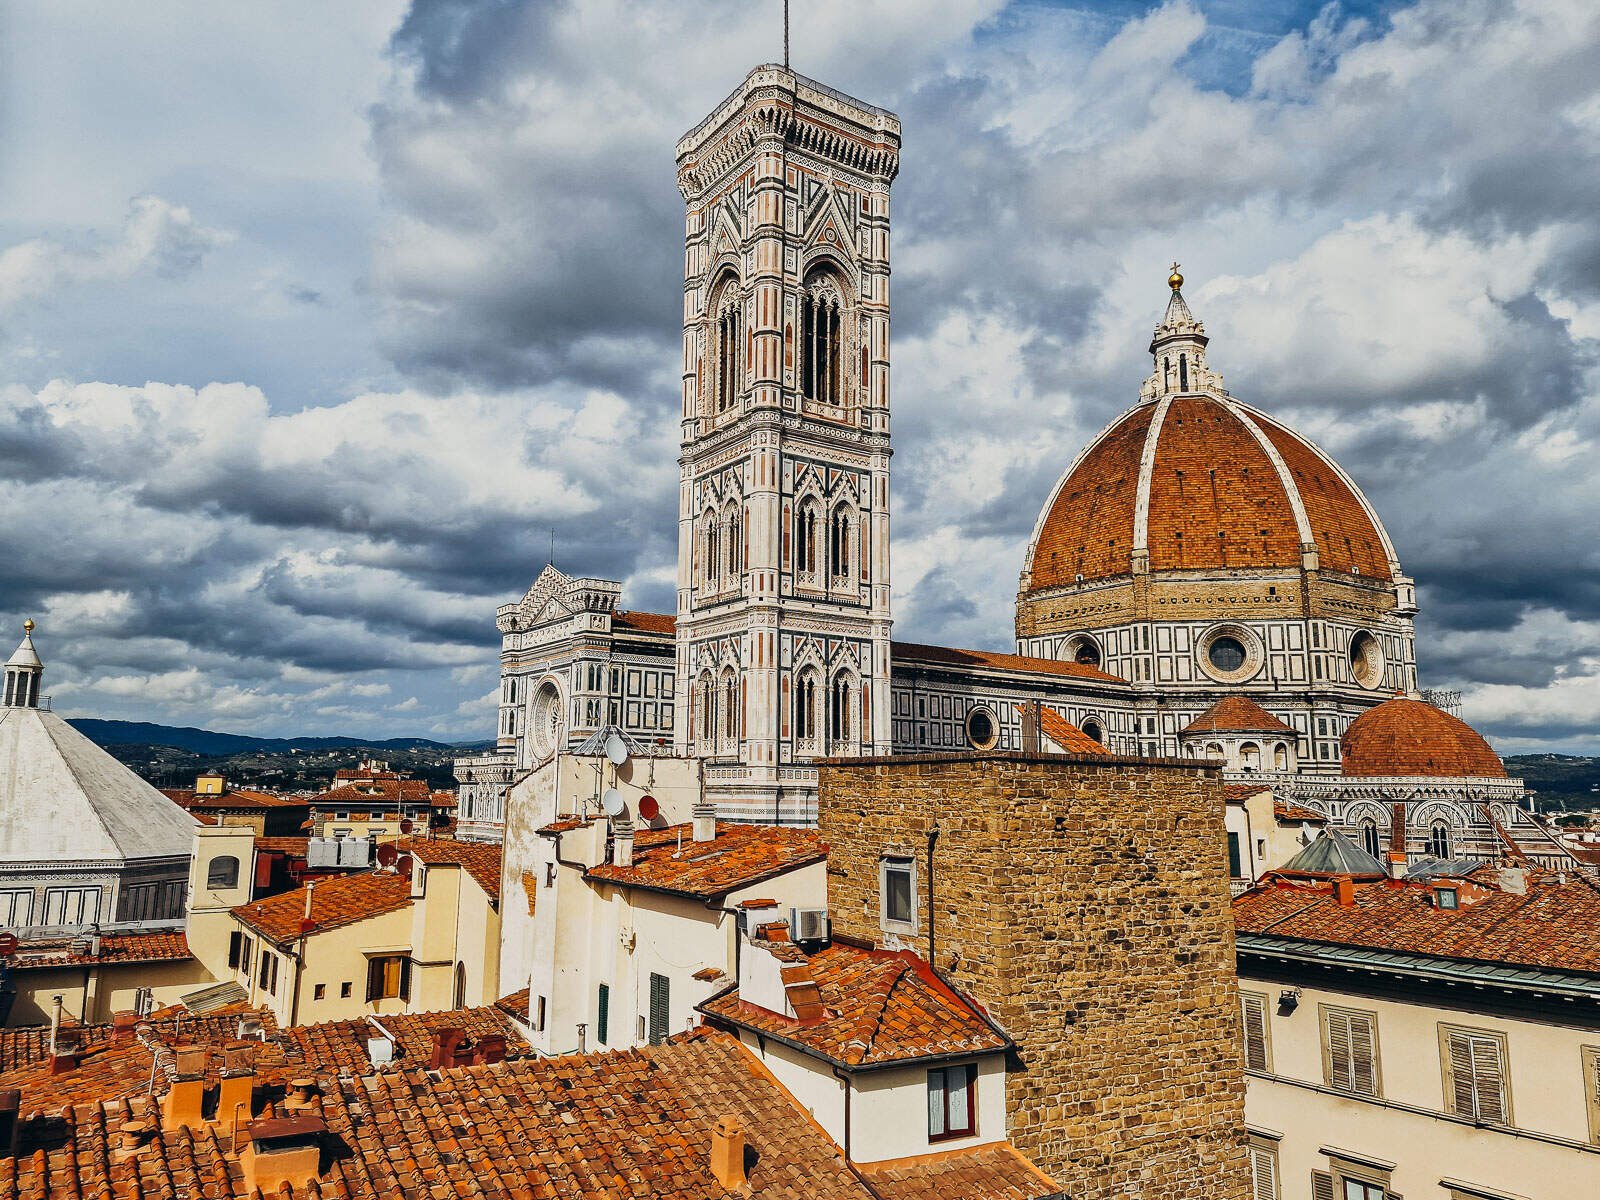 A view across roof tops of the famous dome and tower of the Florence Duomo in Italy with terracotta orange dome and black detail architecture